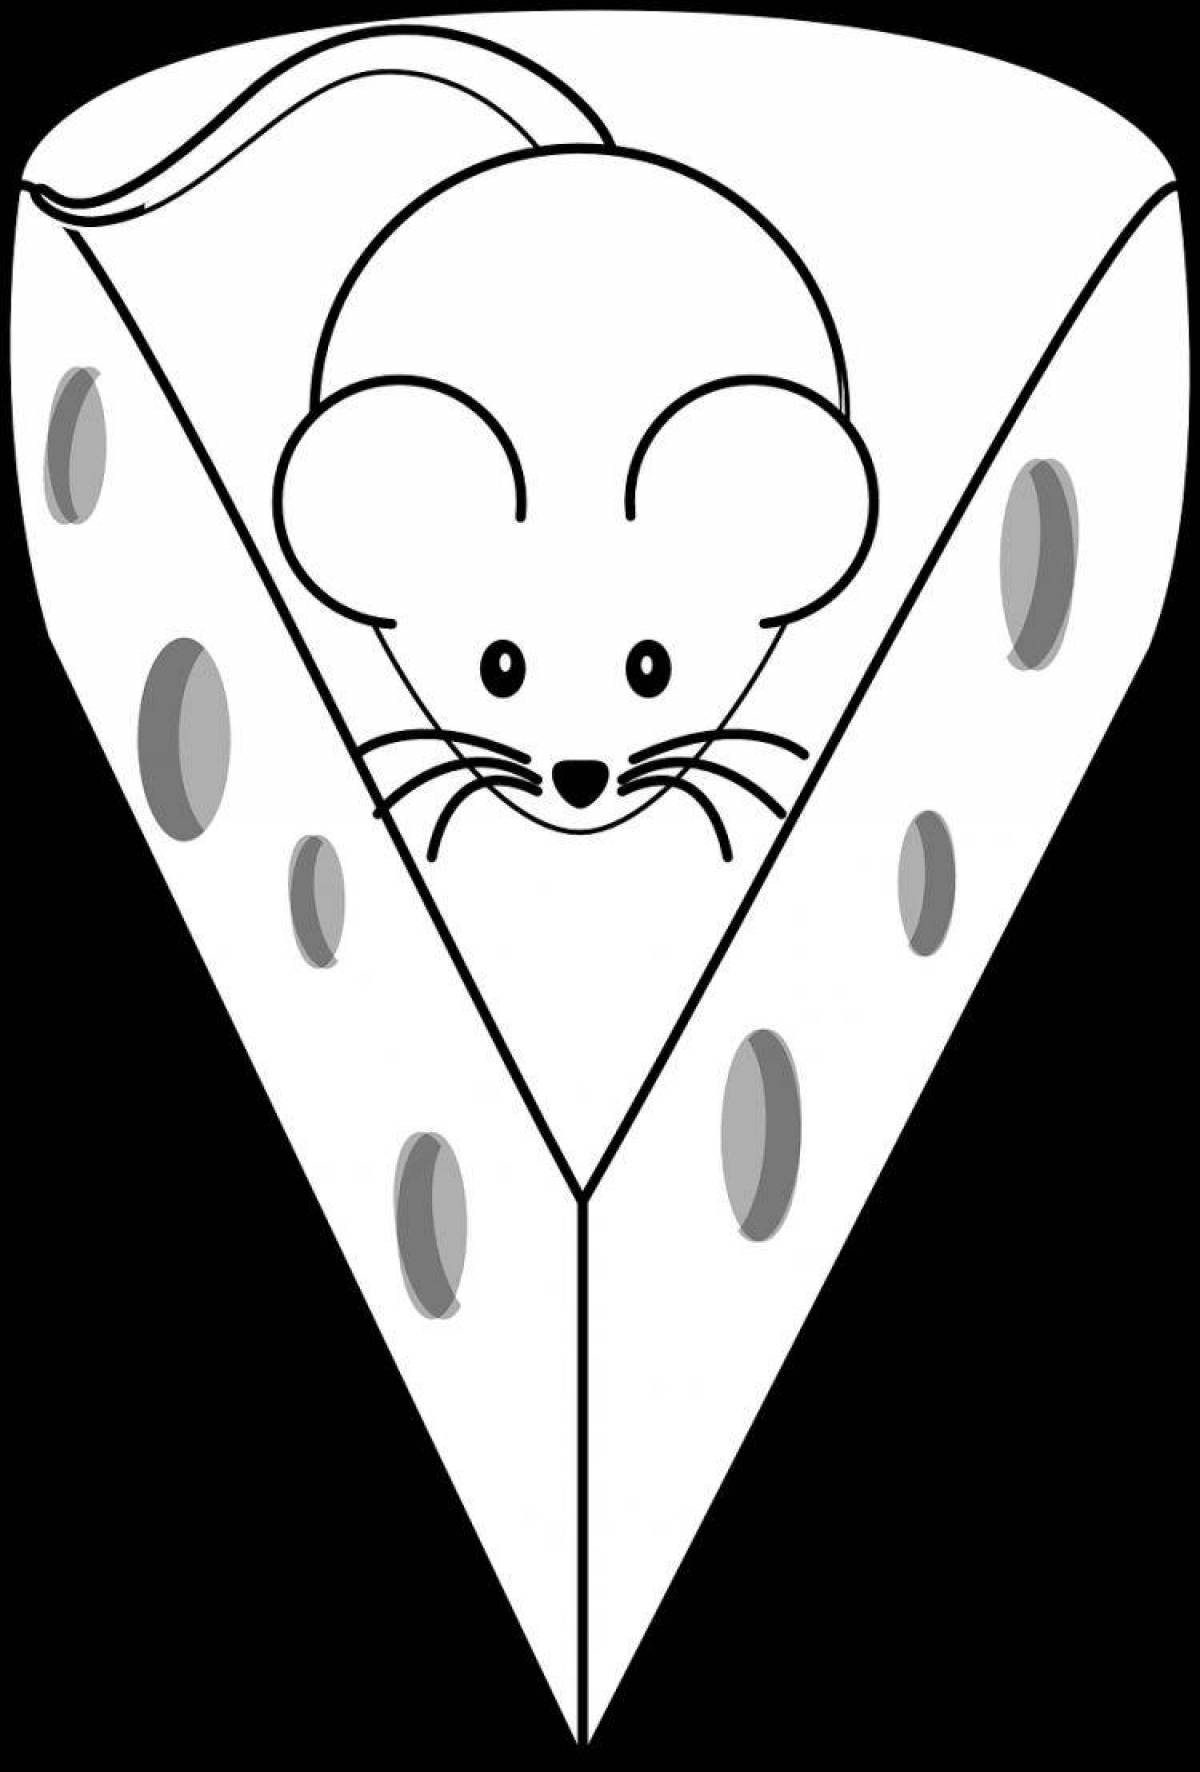 Coloring book bright mouse with cheese